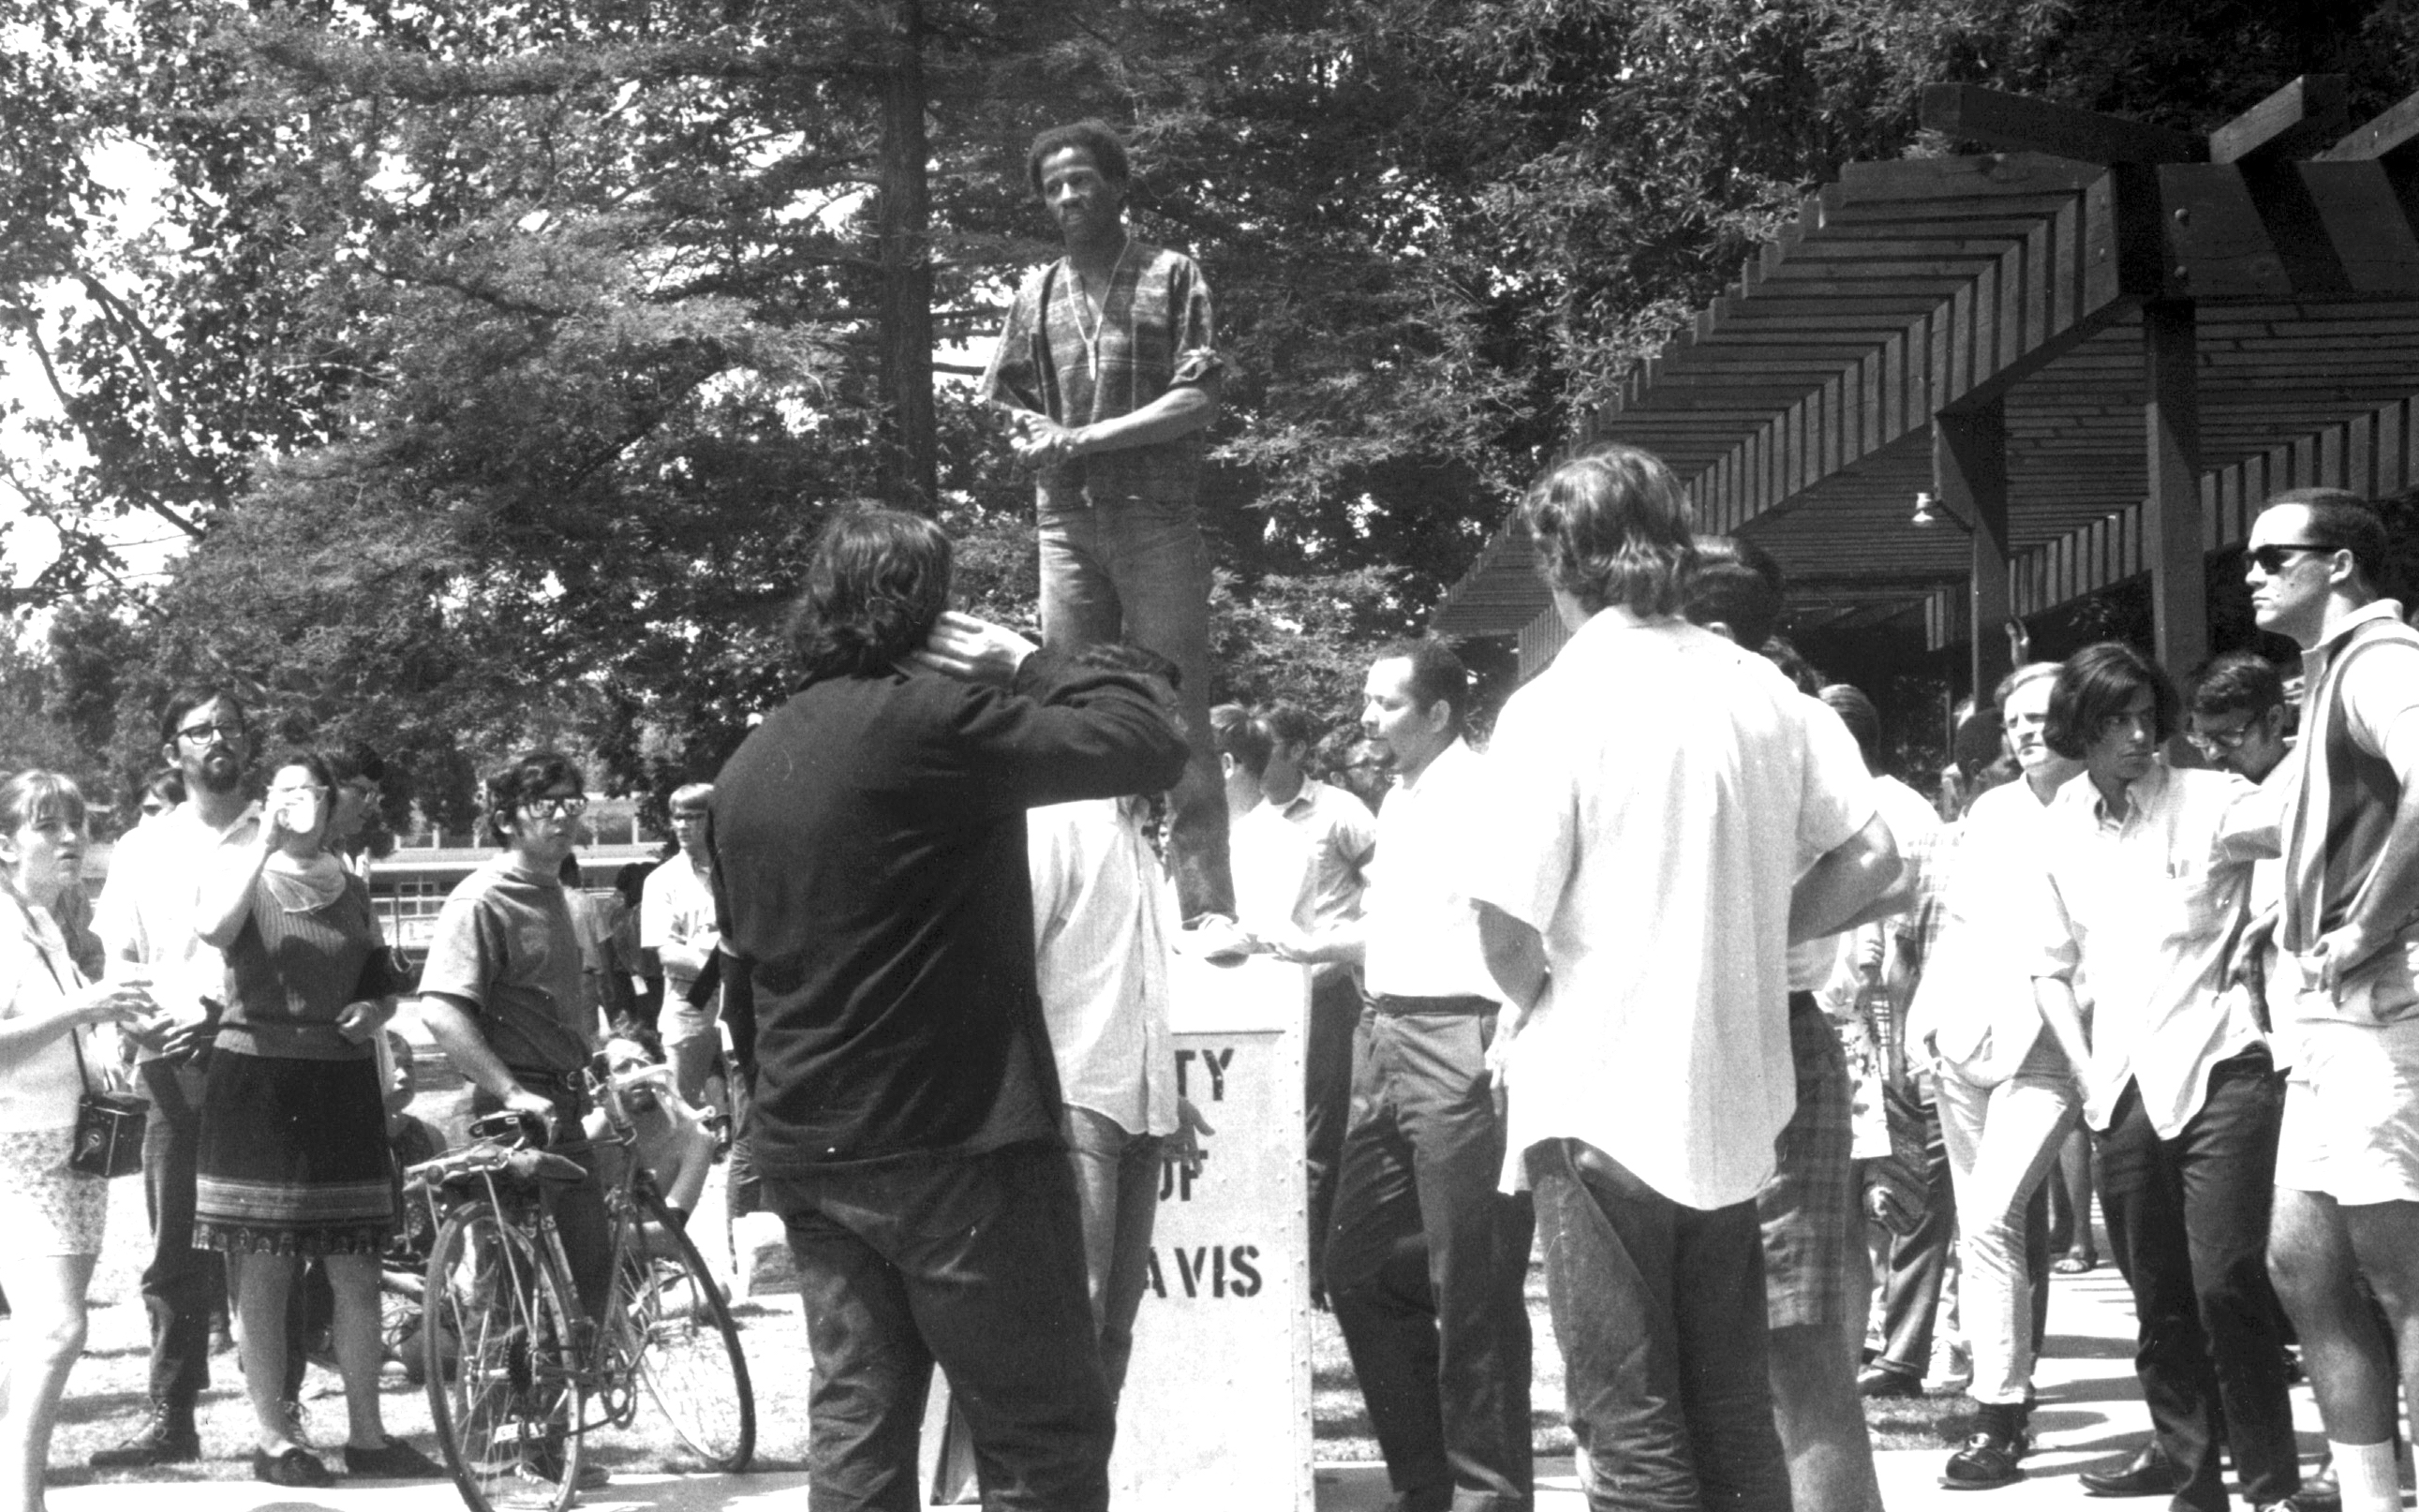 Mel Posey, one of the leaders of the Black Students’ Union at UC Davis, headed a number of protest efforts on campus in 1969.